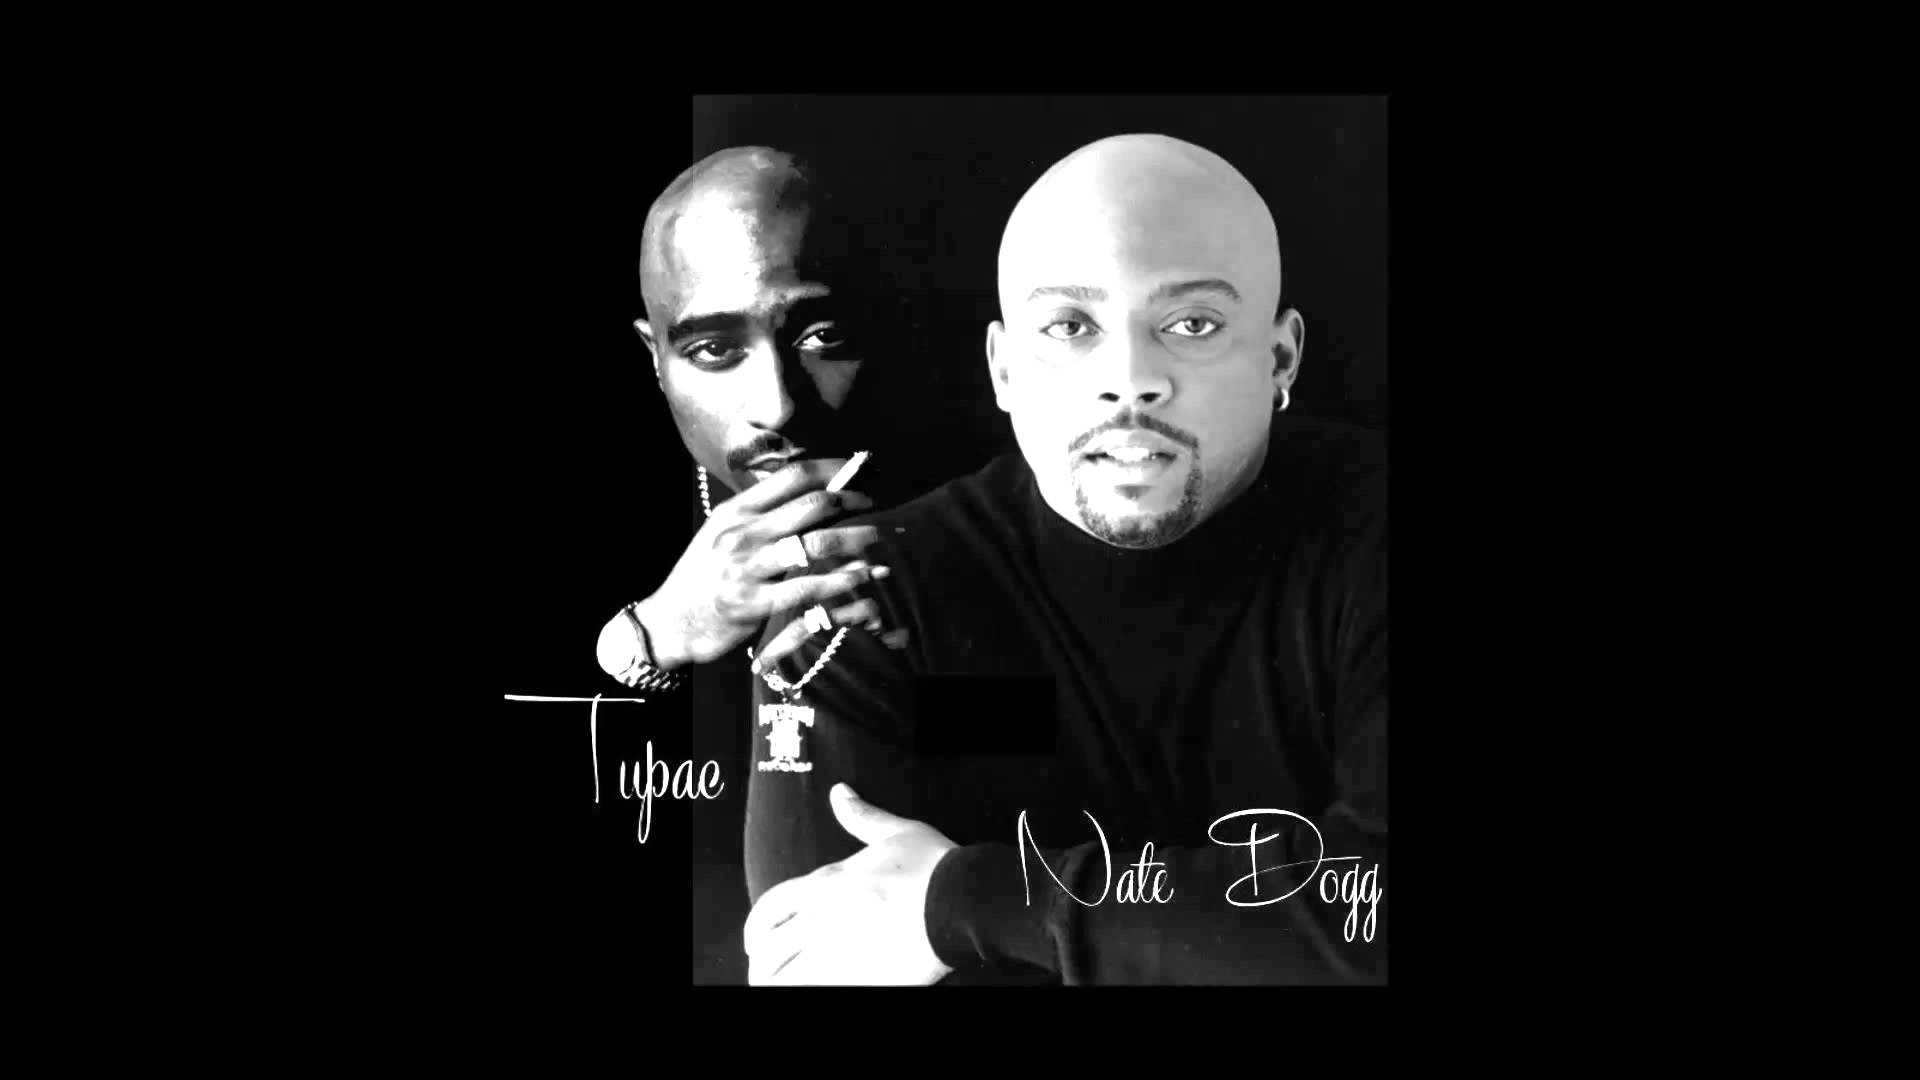 NATE DOGG FEAT TUPAC DOES IT BETTER REMIX PROD BY OCBEAT